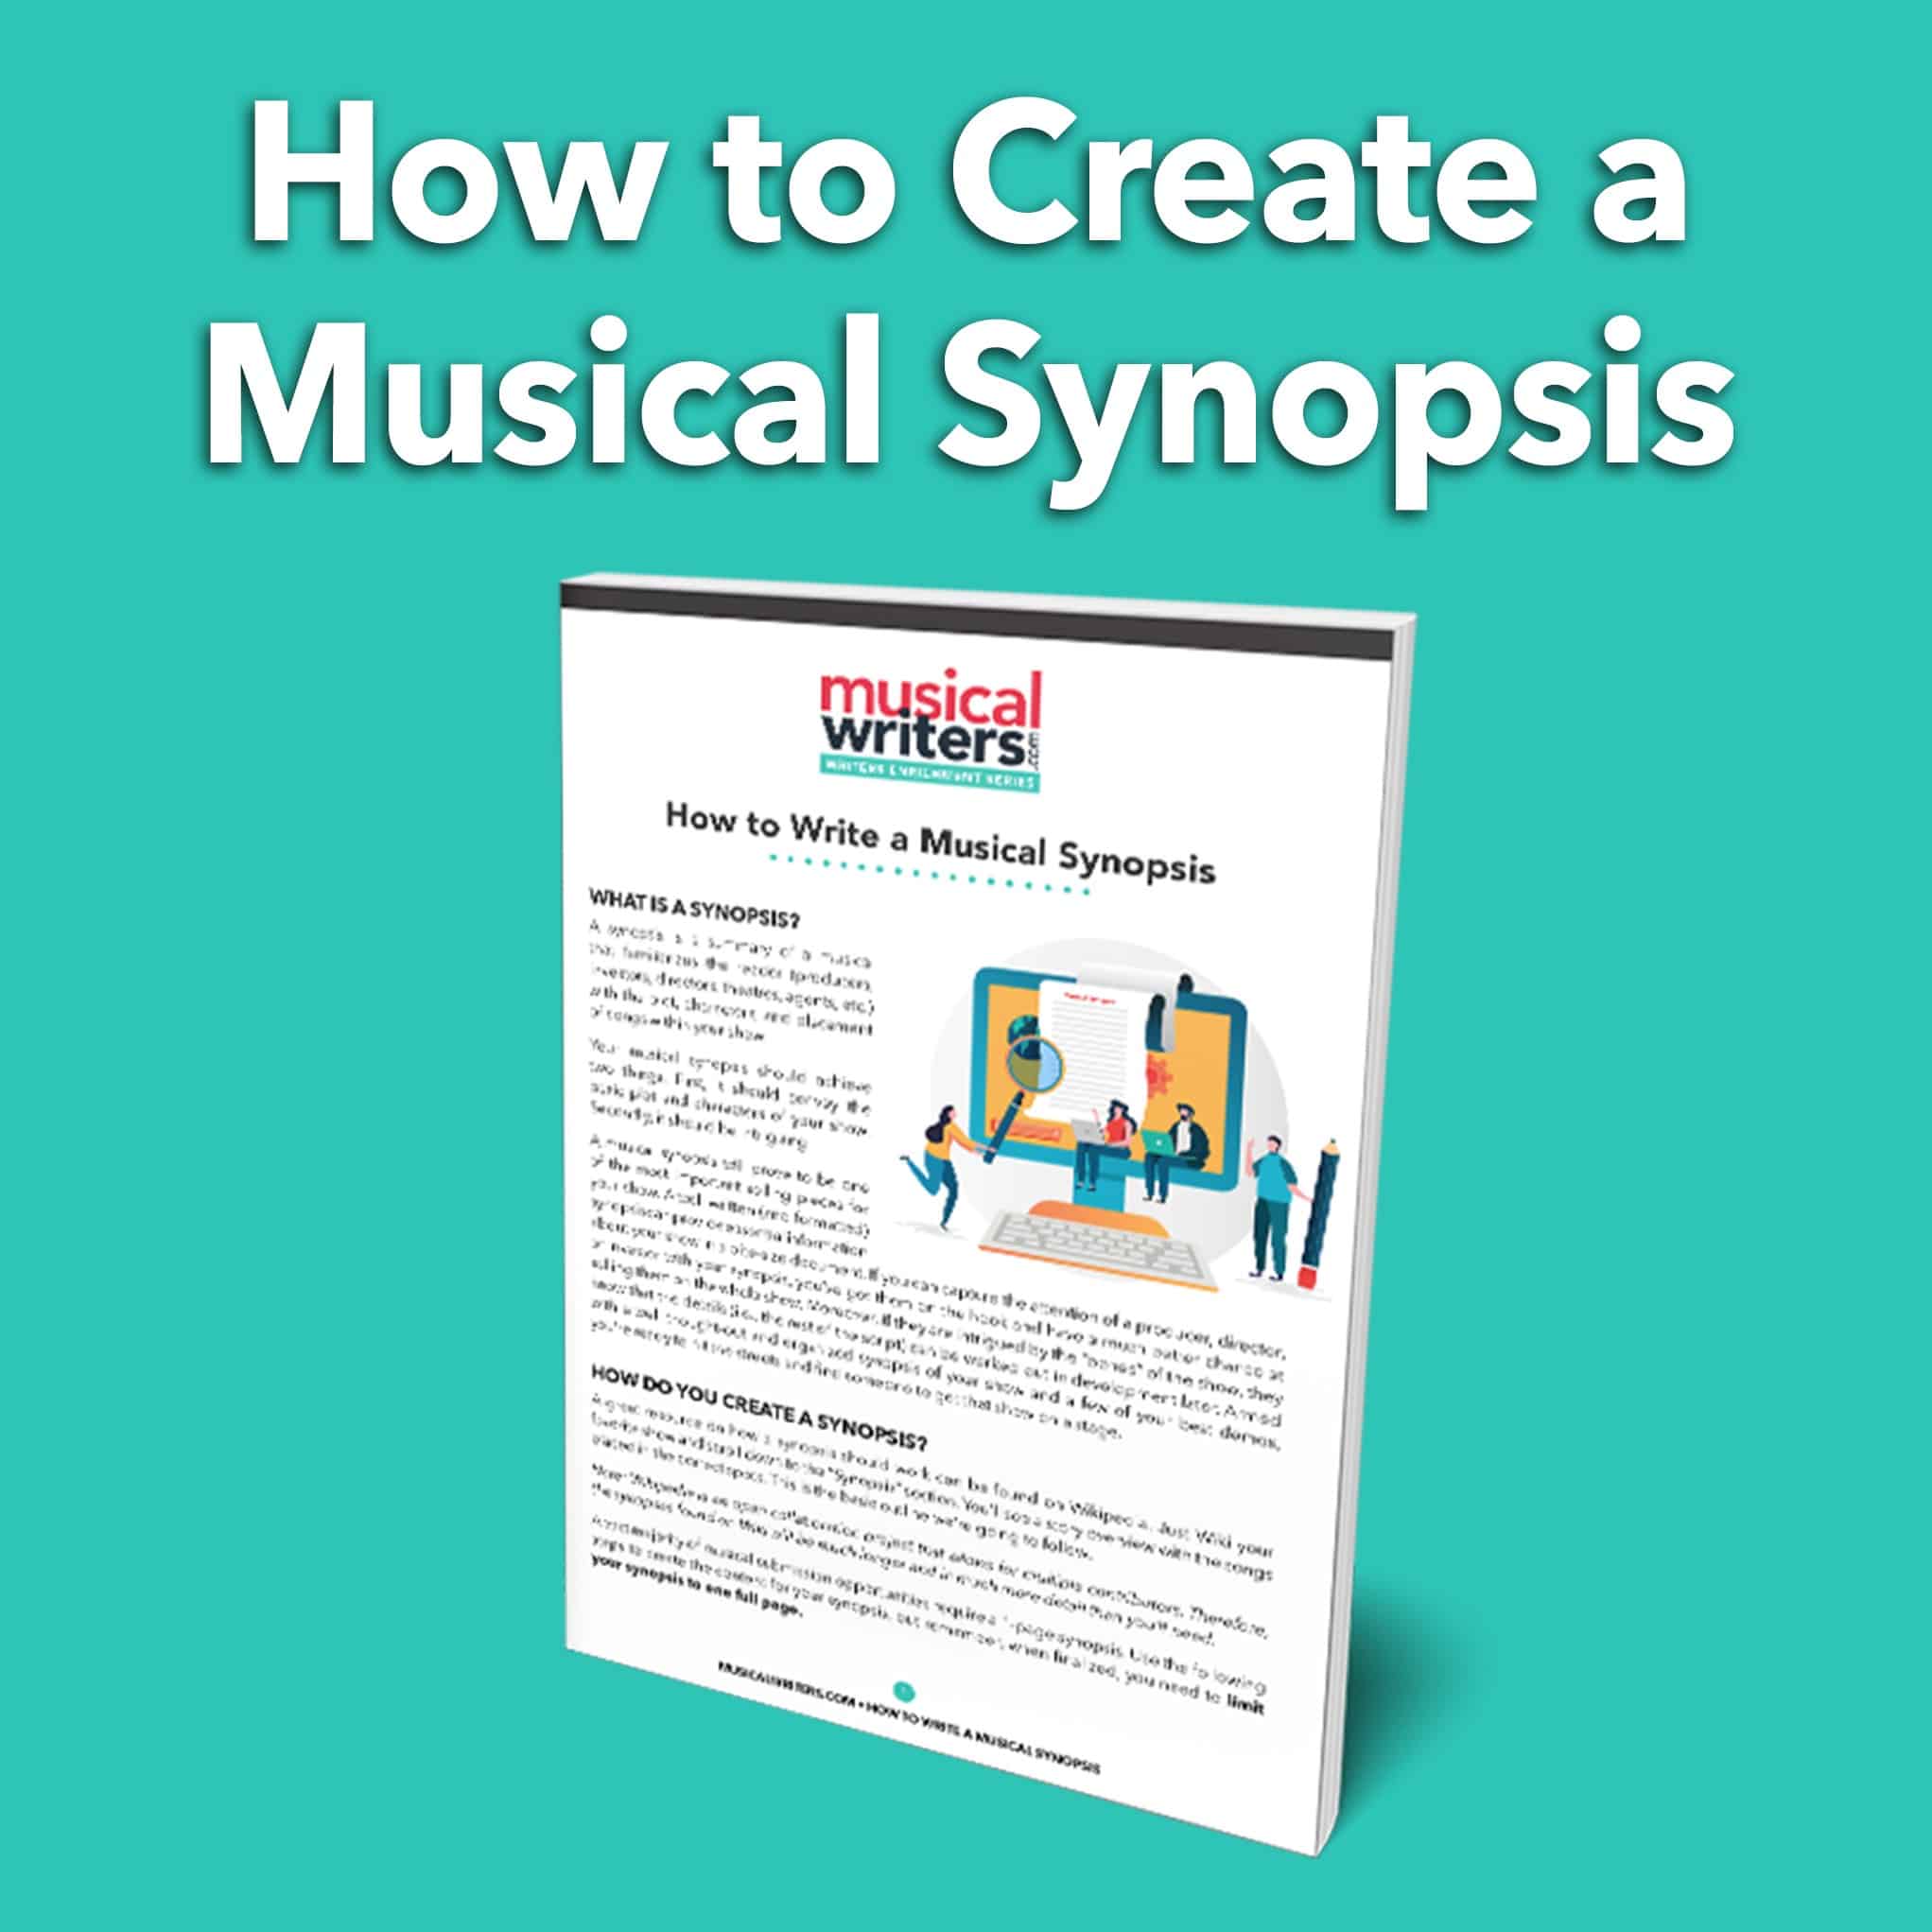 How to Create a Musical Synopsis - MusicalWriters.com